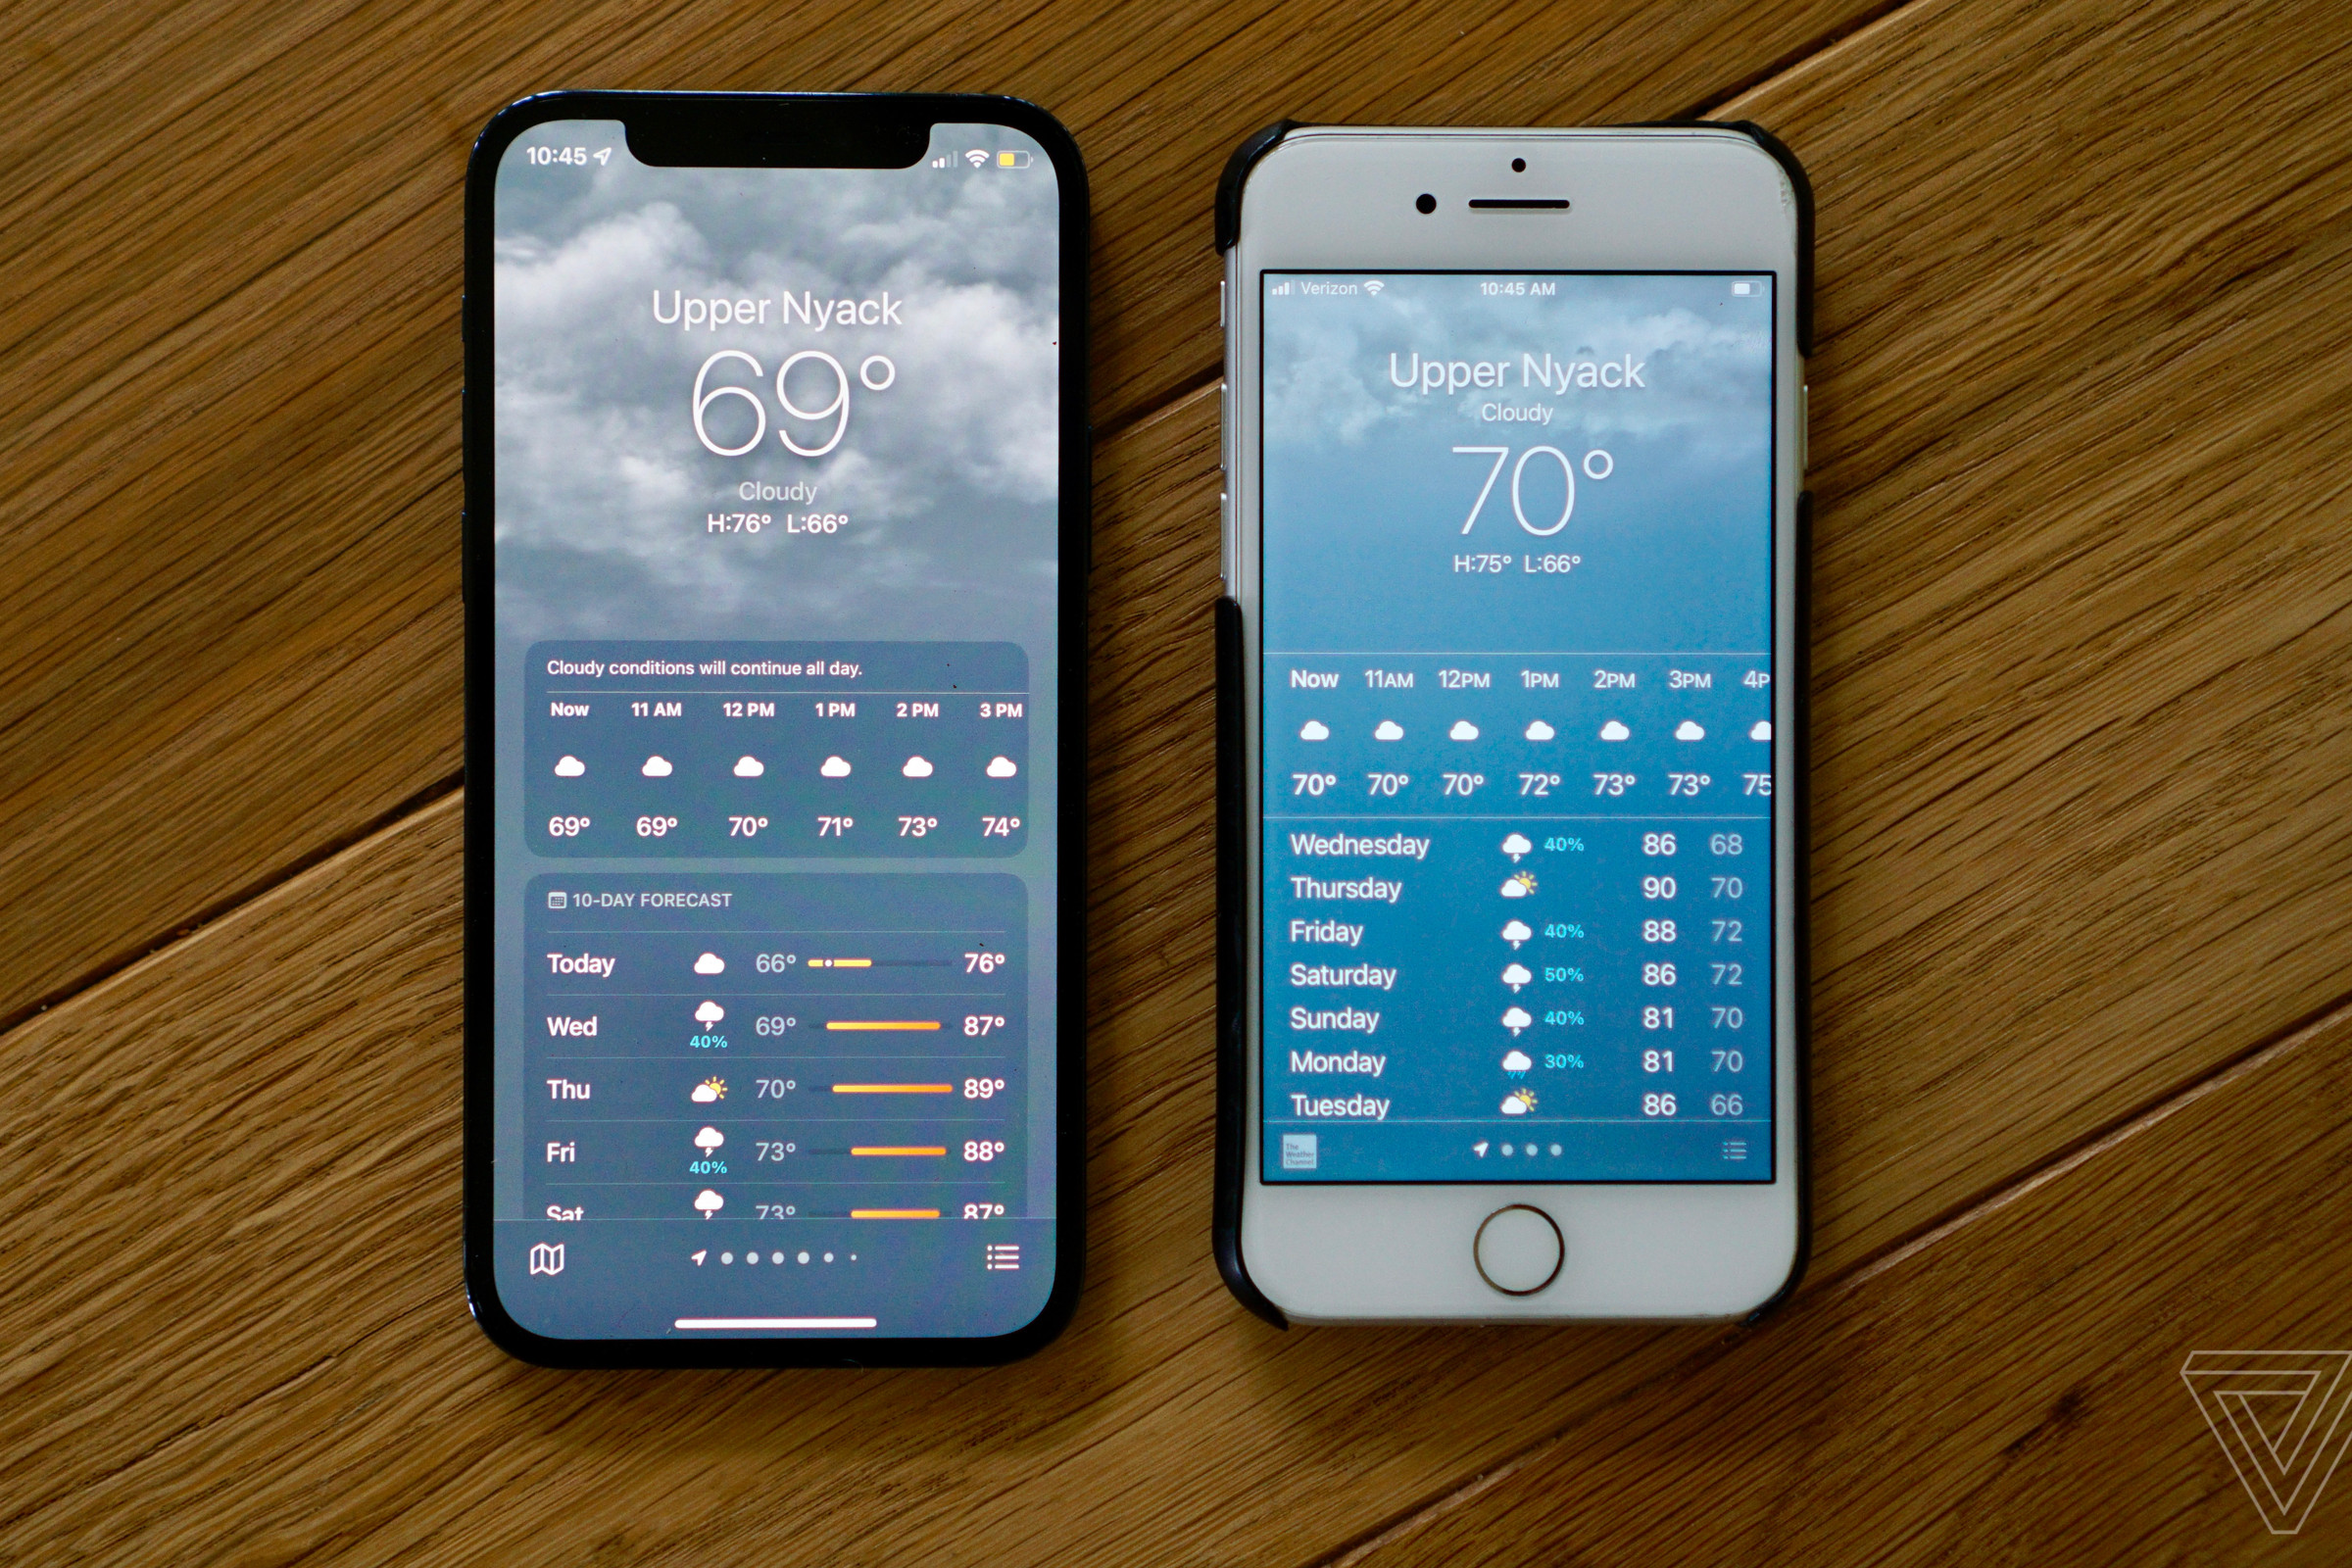 A weather forecast on iOS 15 compared to the rounded forecast on iOS 14.6